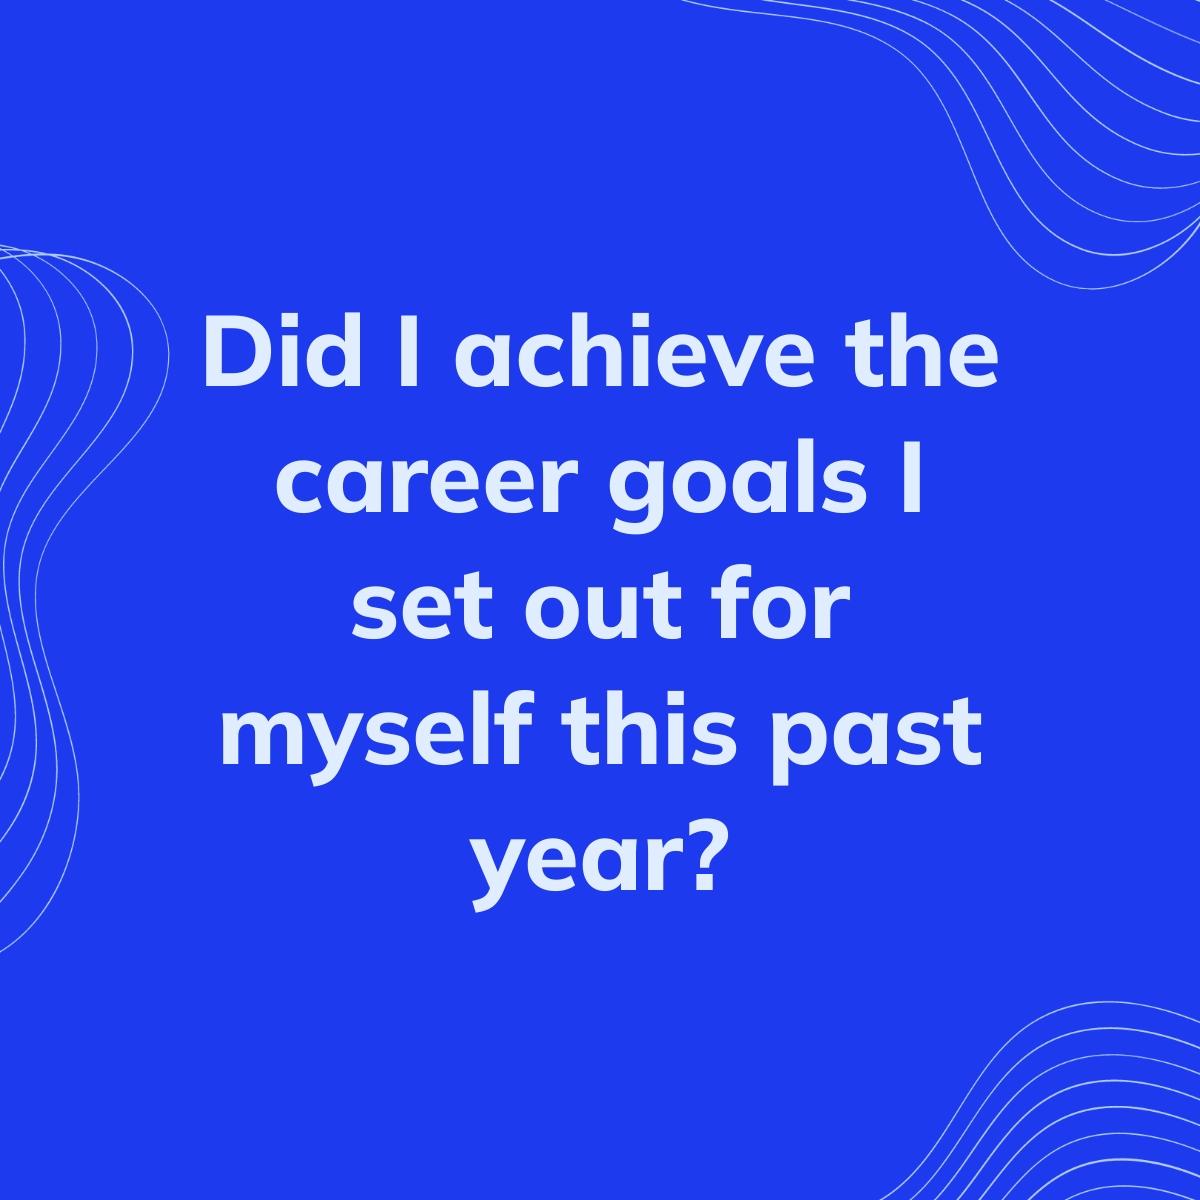 Journal Prompt: Did I achieve the career goals I set out for myself this past year?